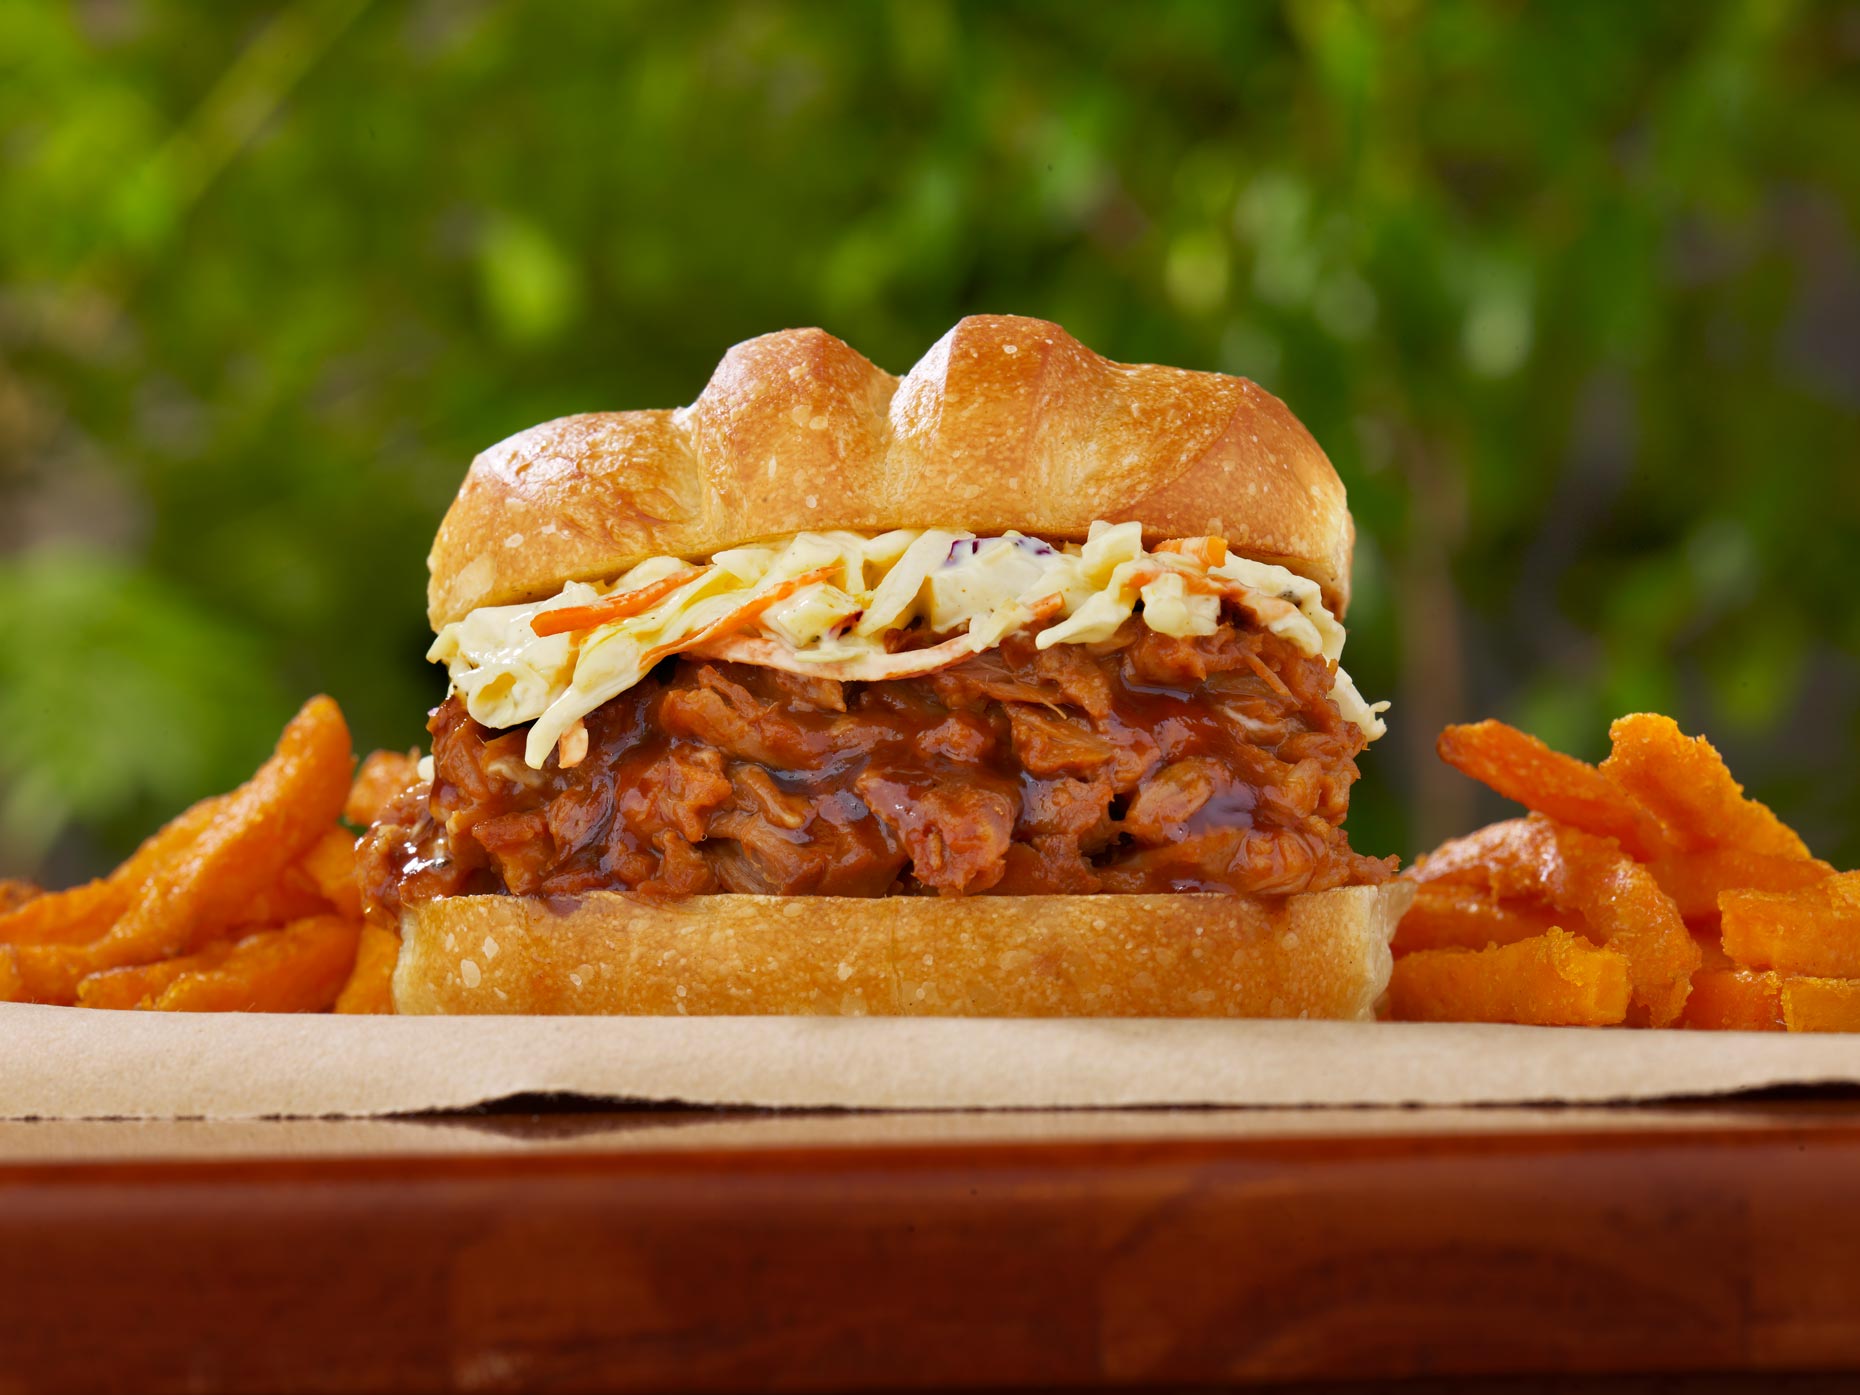   Food Photography | Pulled Pork  Sandwich 